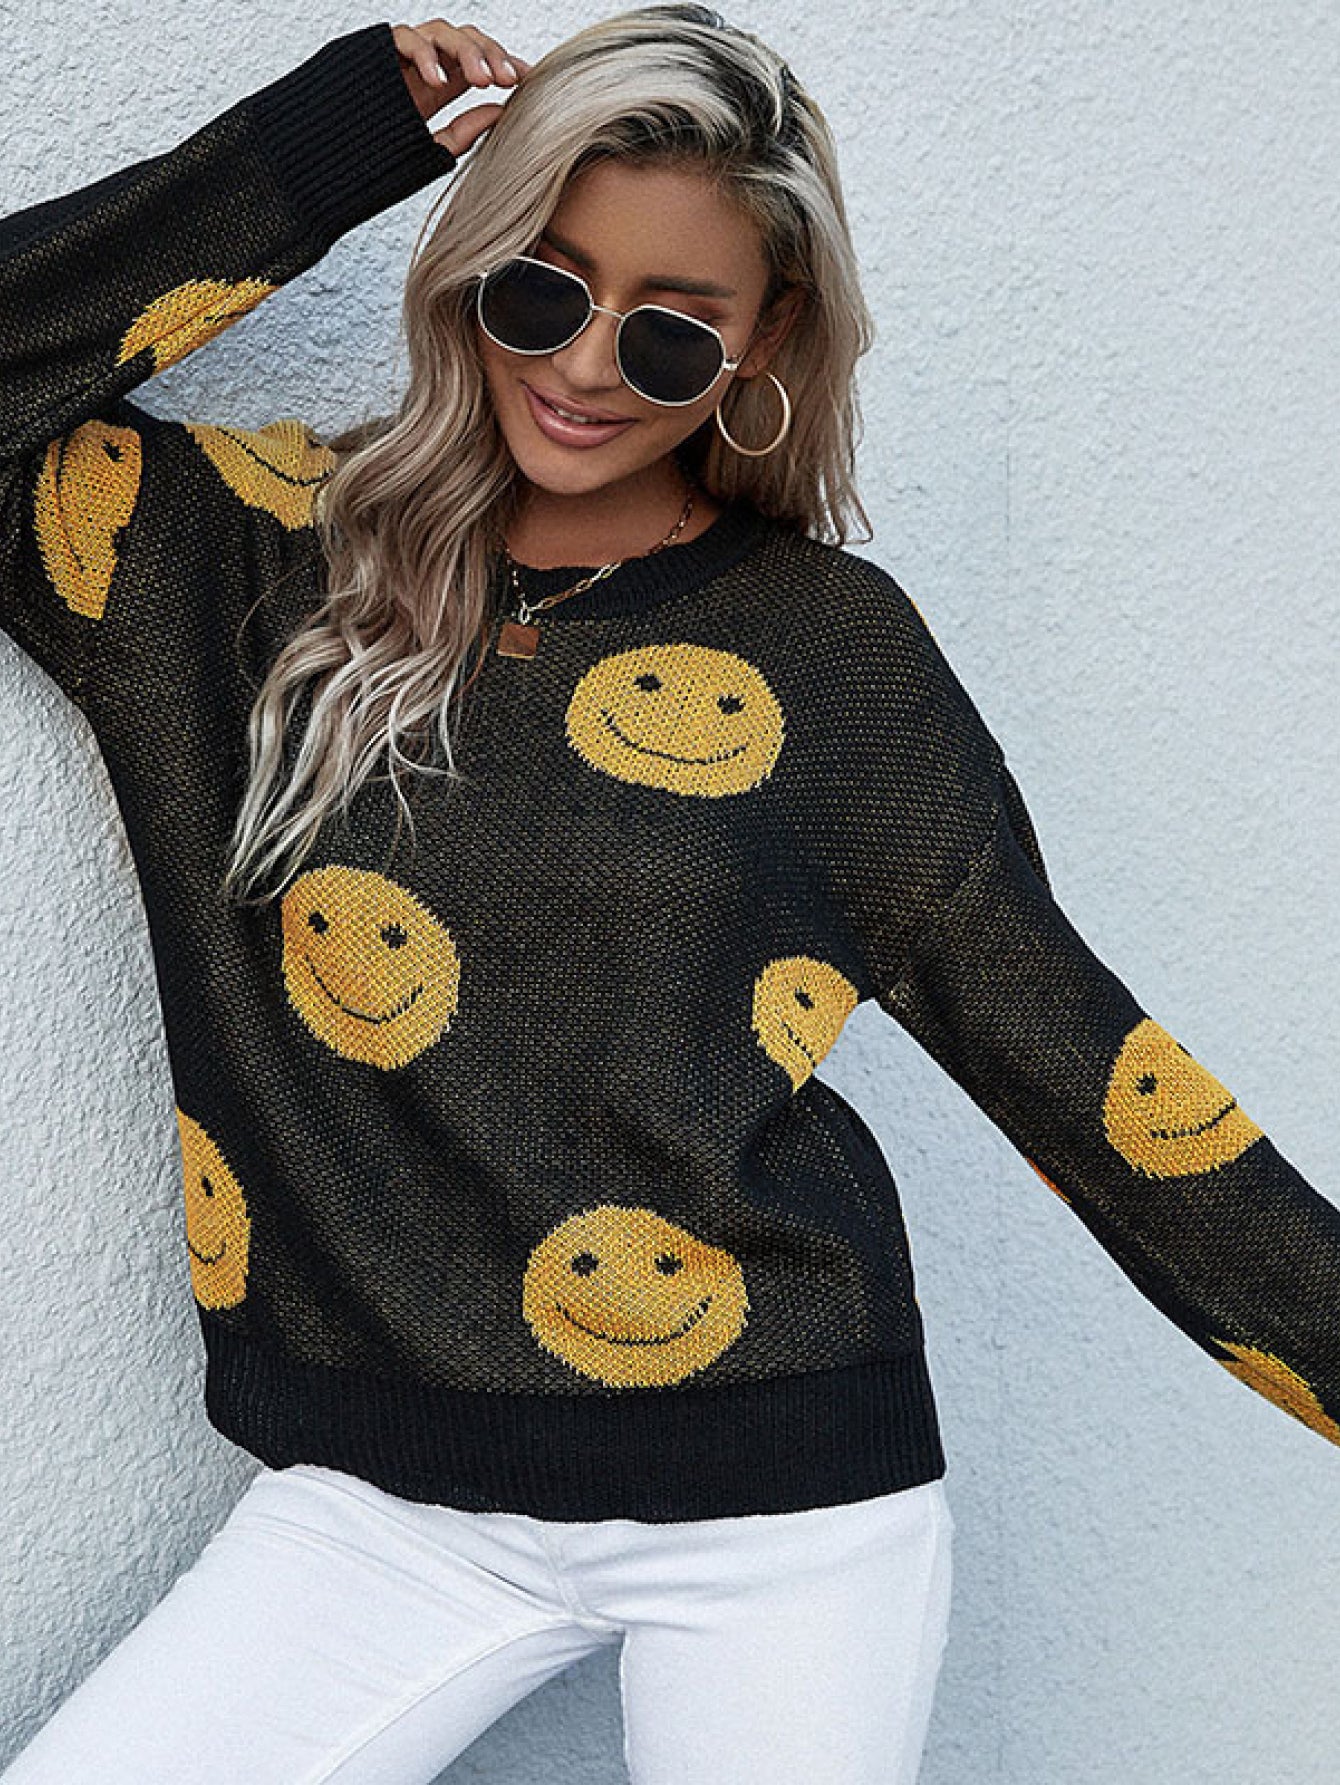 Have A Nice Day Smiley Face Black and Yellow Knit Sweater